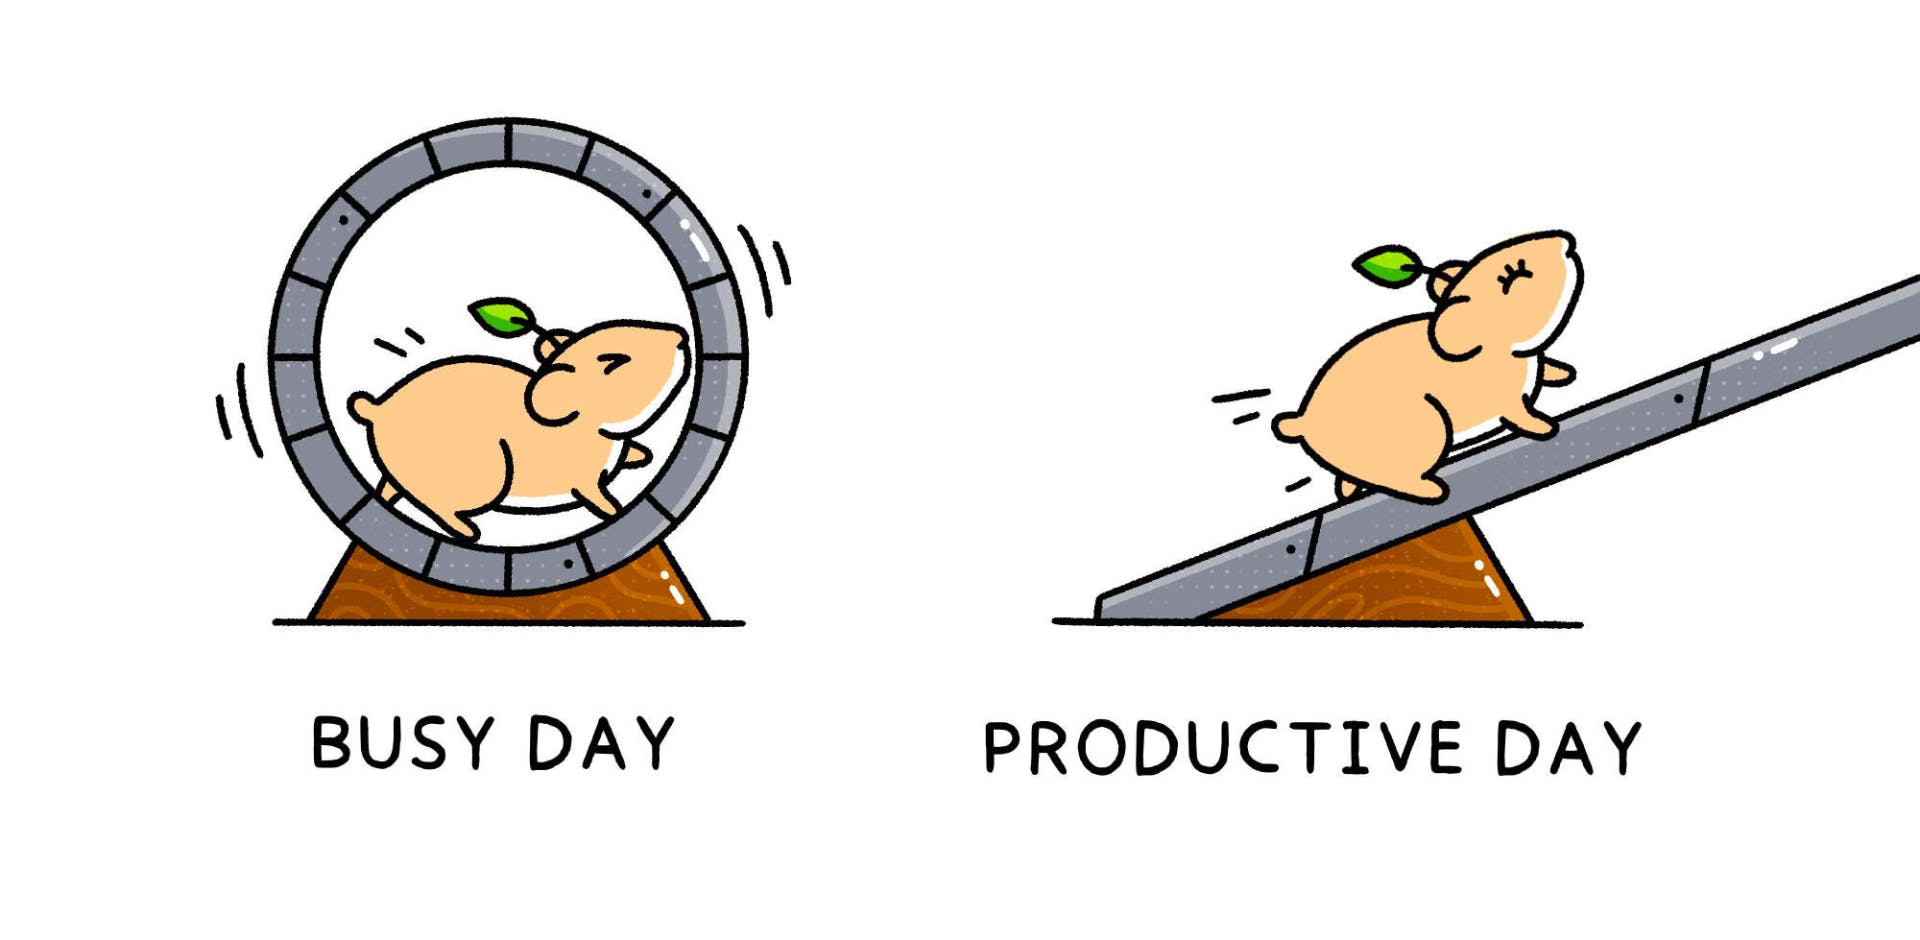 Busy day versus productive day, with illustration